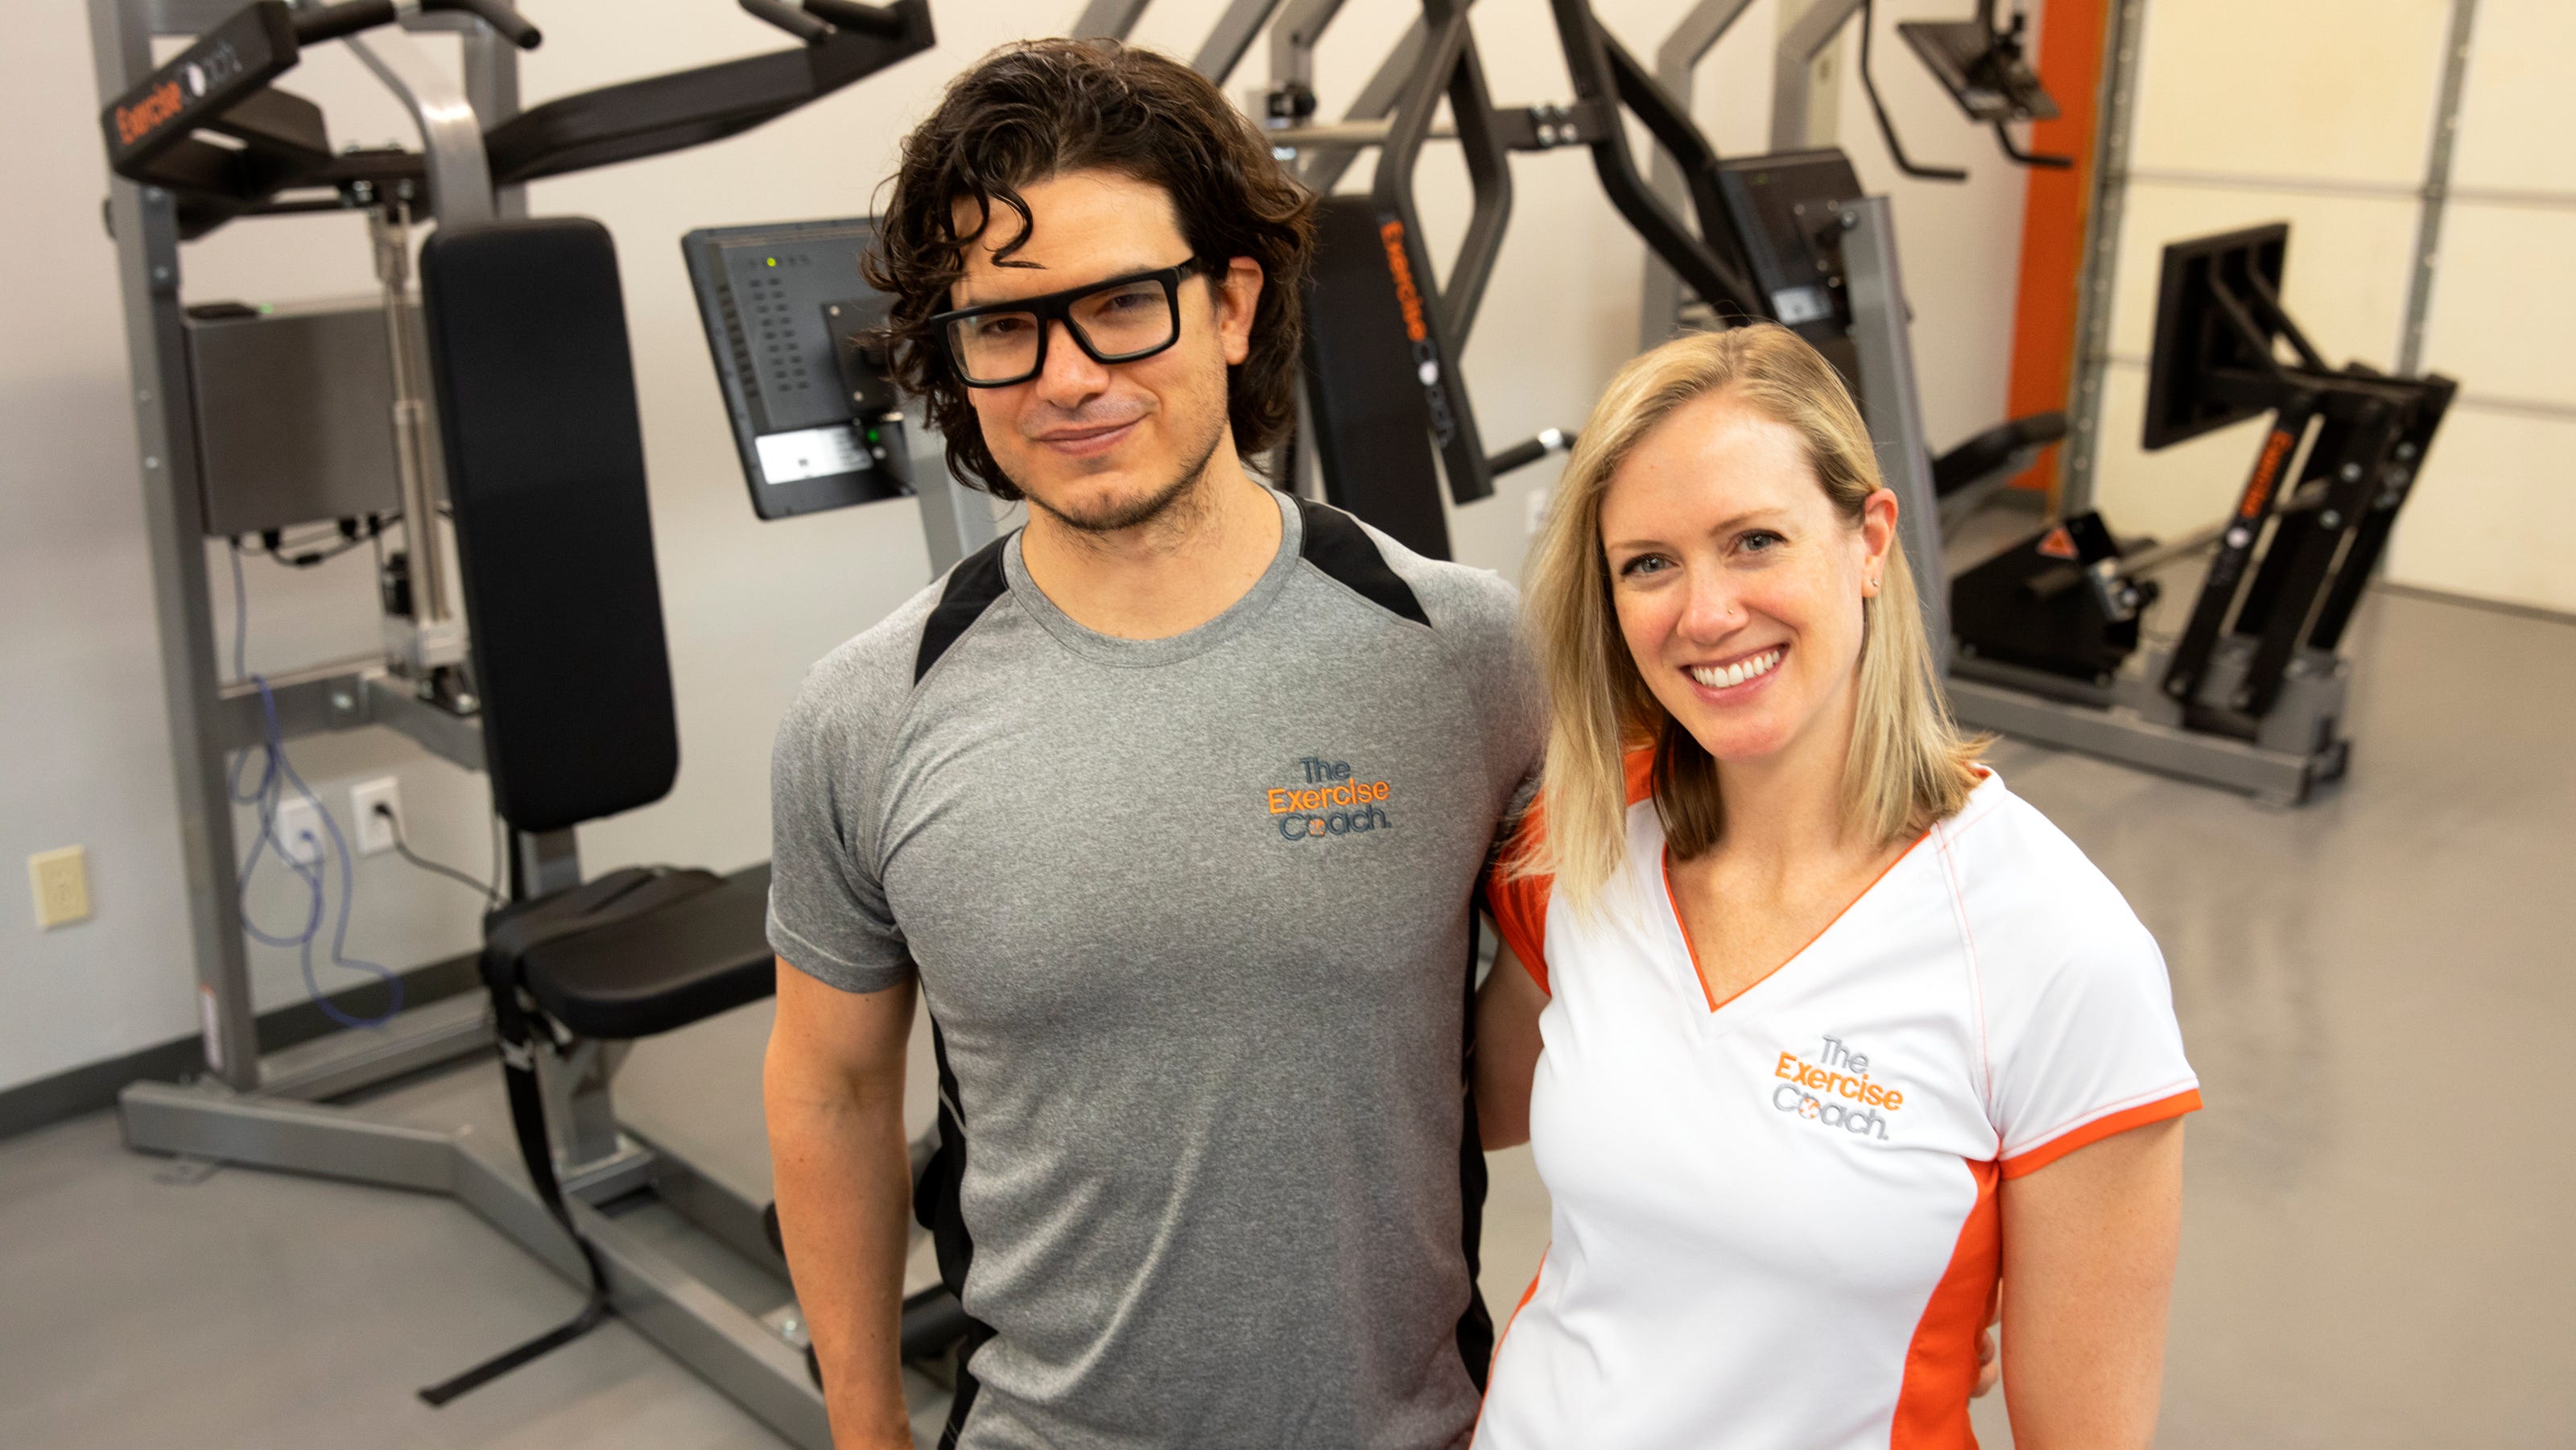 The Coach, a high-tech fitness opens in West Chester